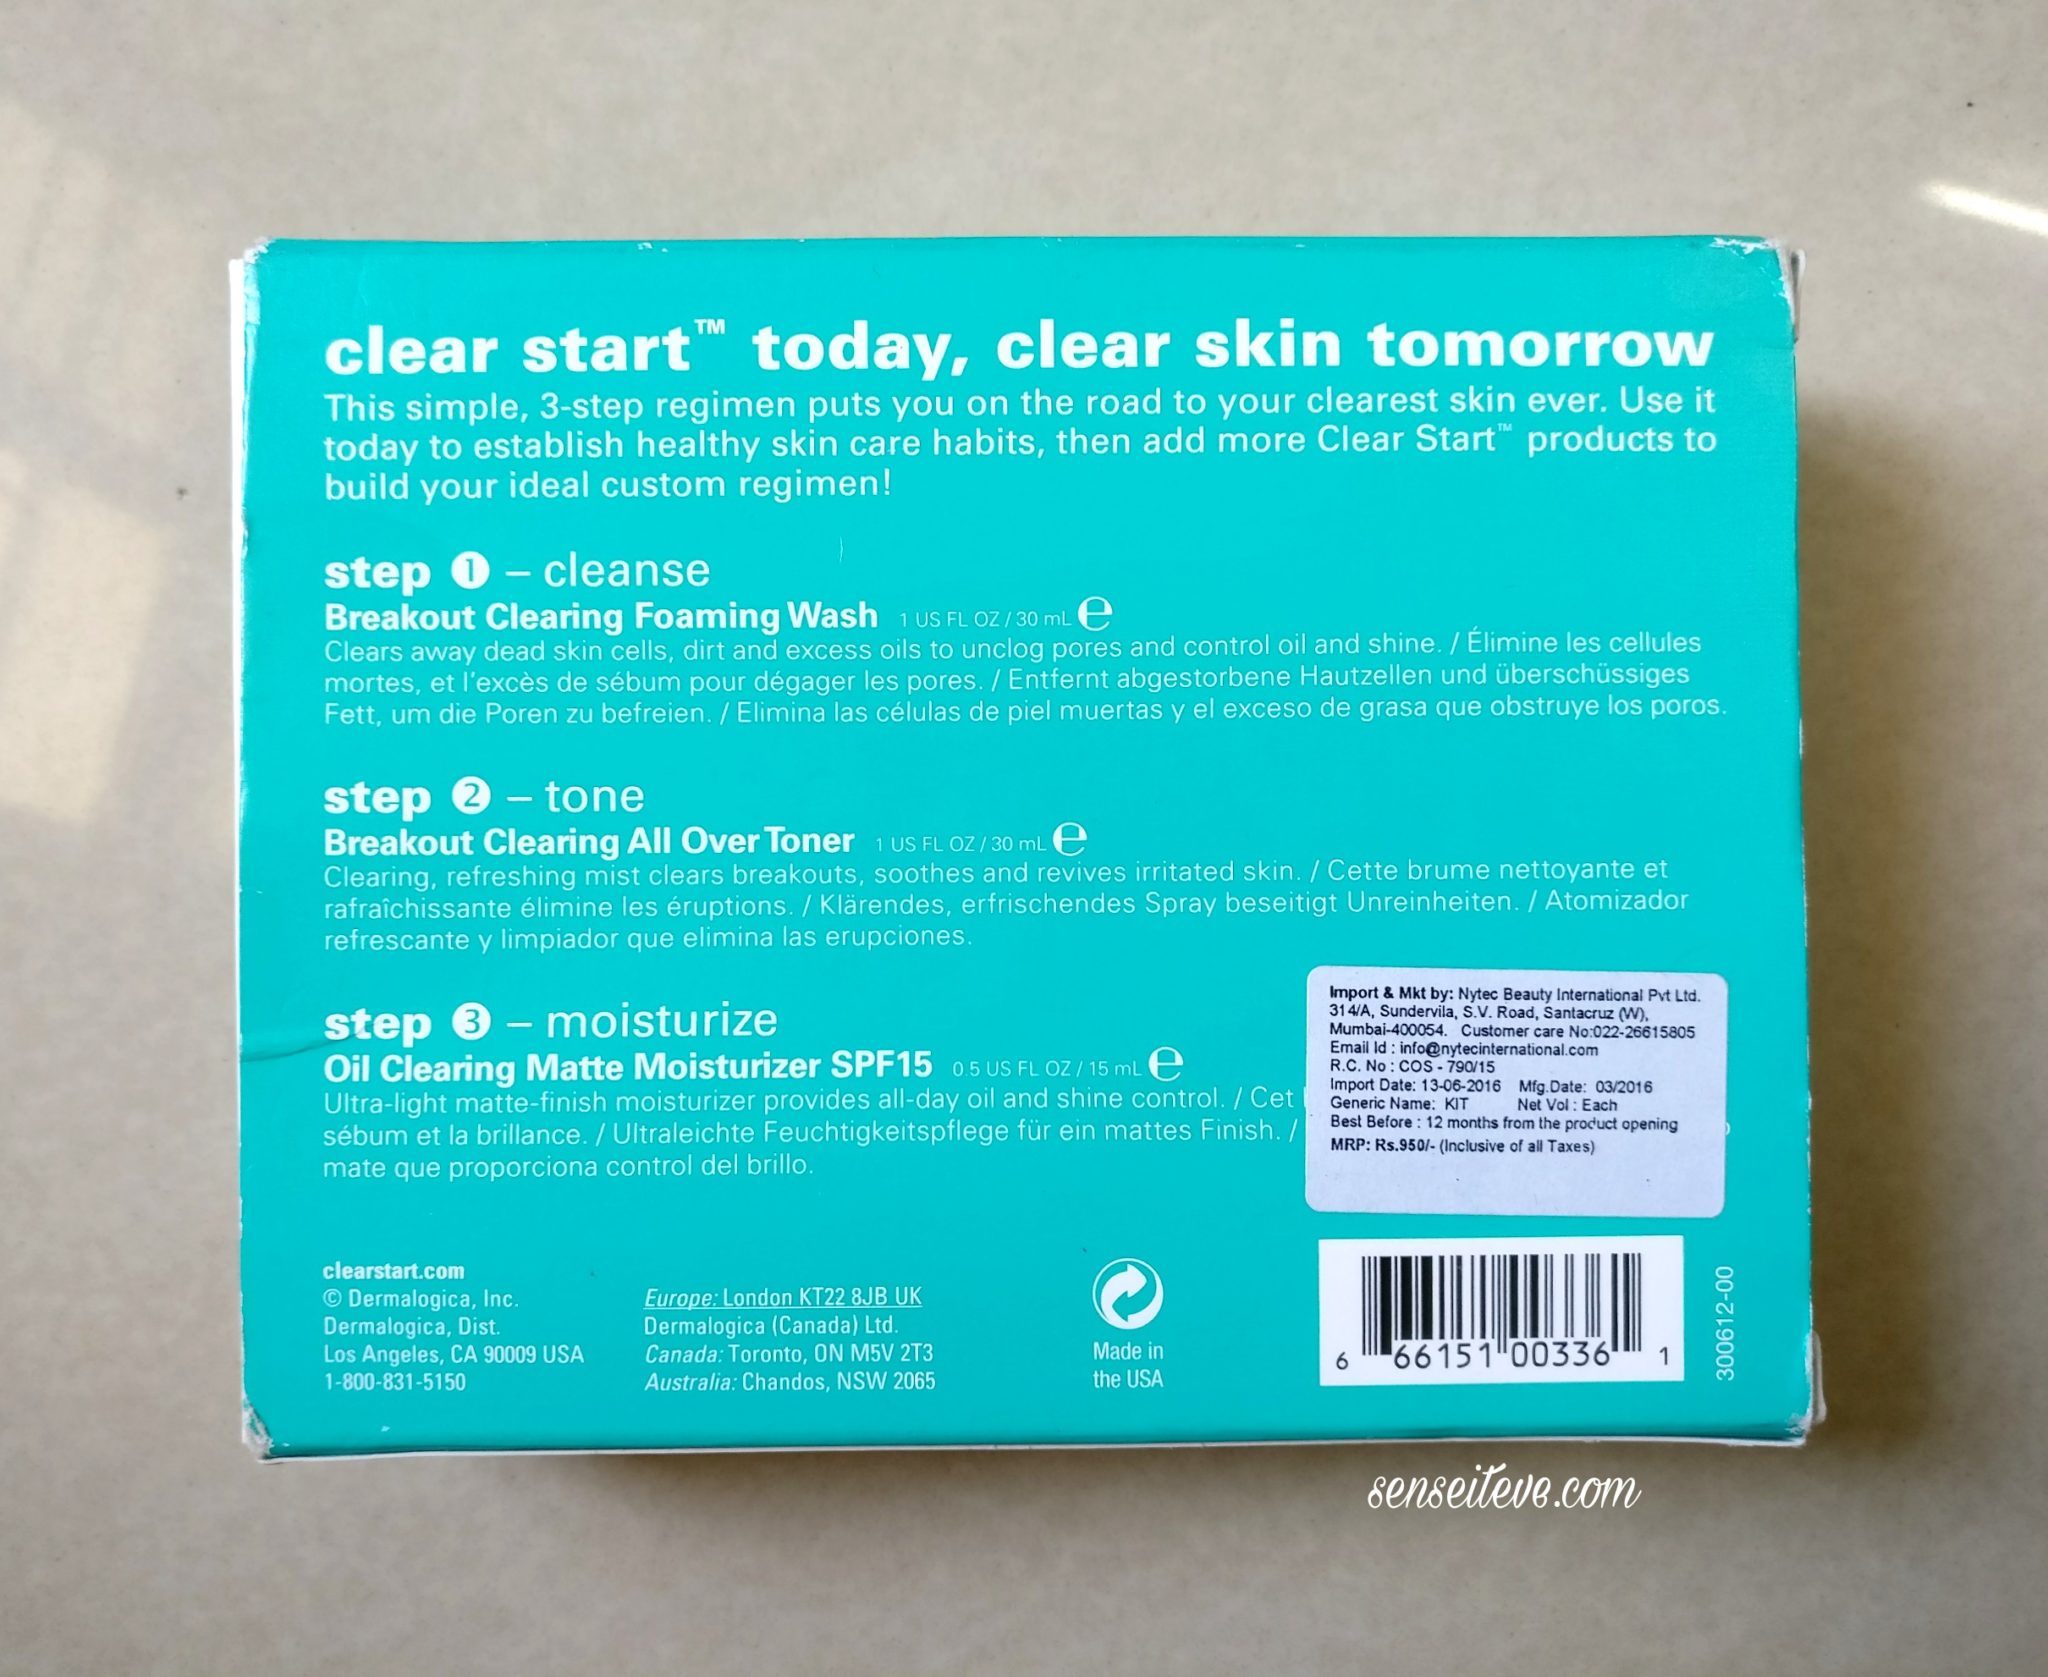 Dermalogica Clear Start Today Clear Skin Tomorrow Sense It Eve Dermalogica Clear Start Today, Clear Skin Tomorrow Kit Review